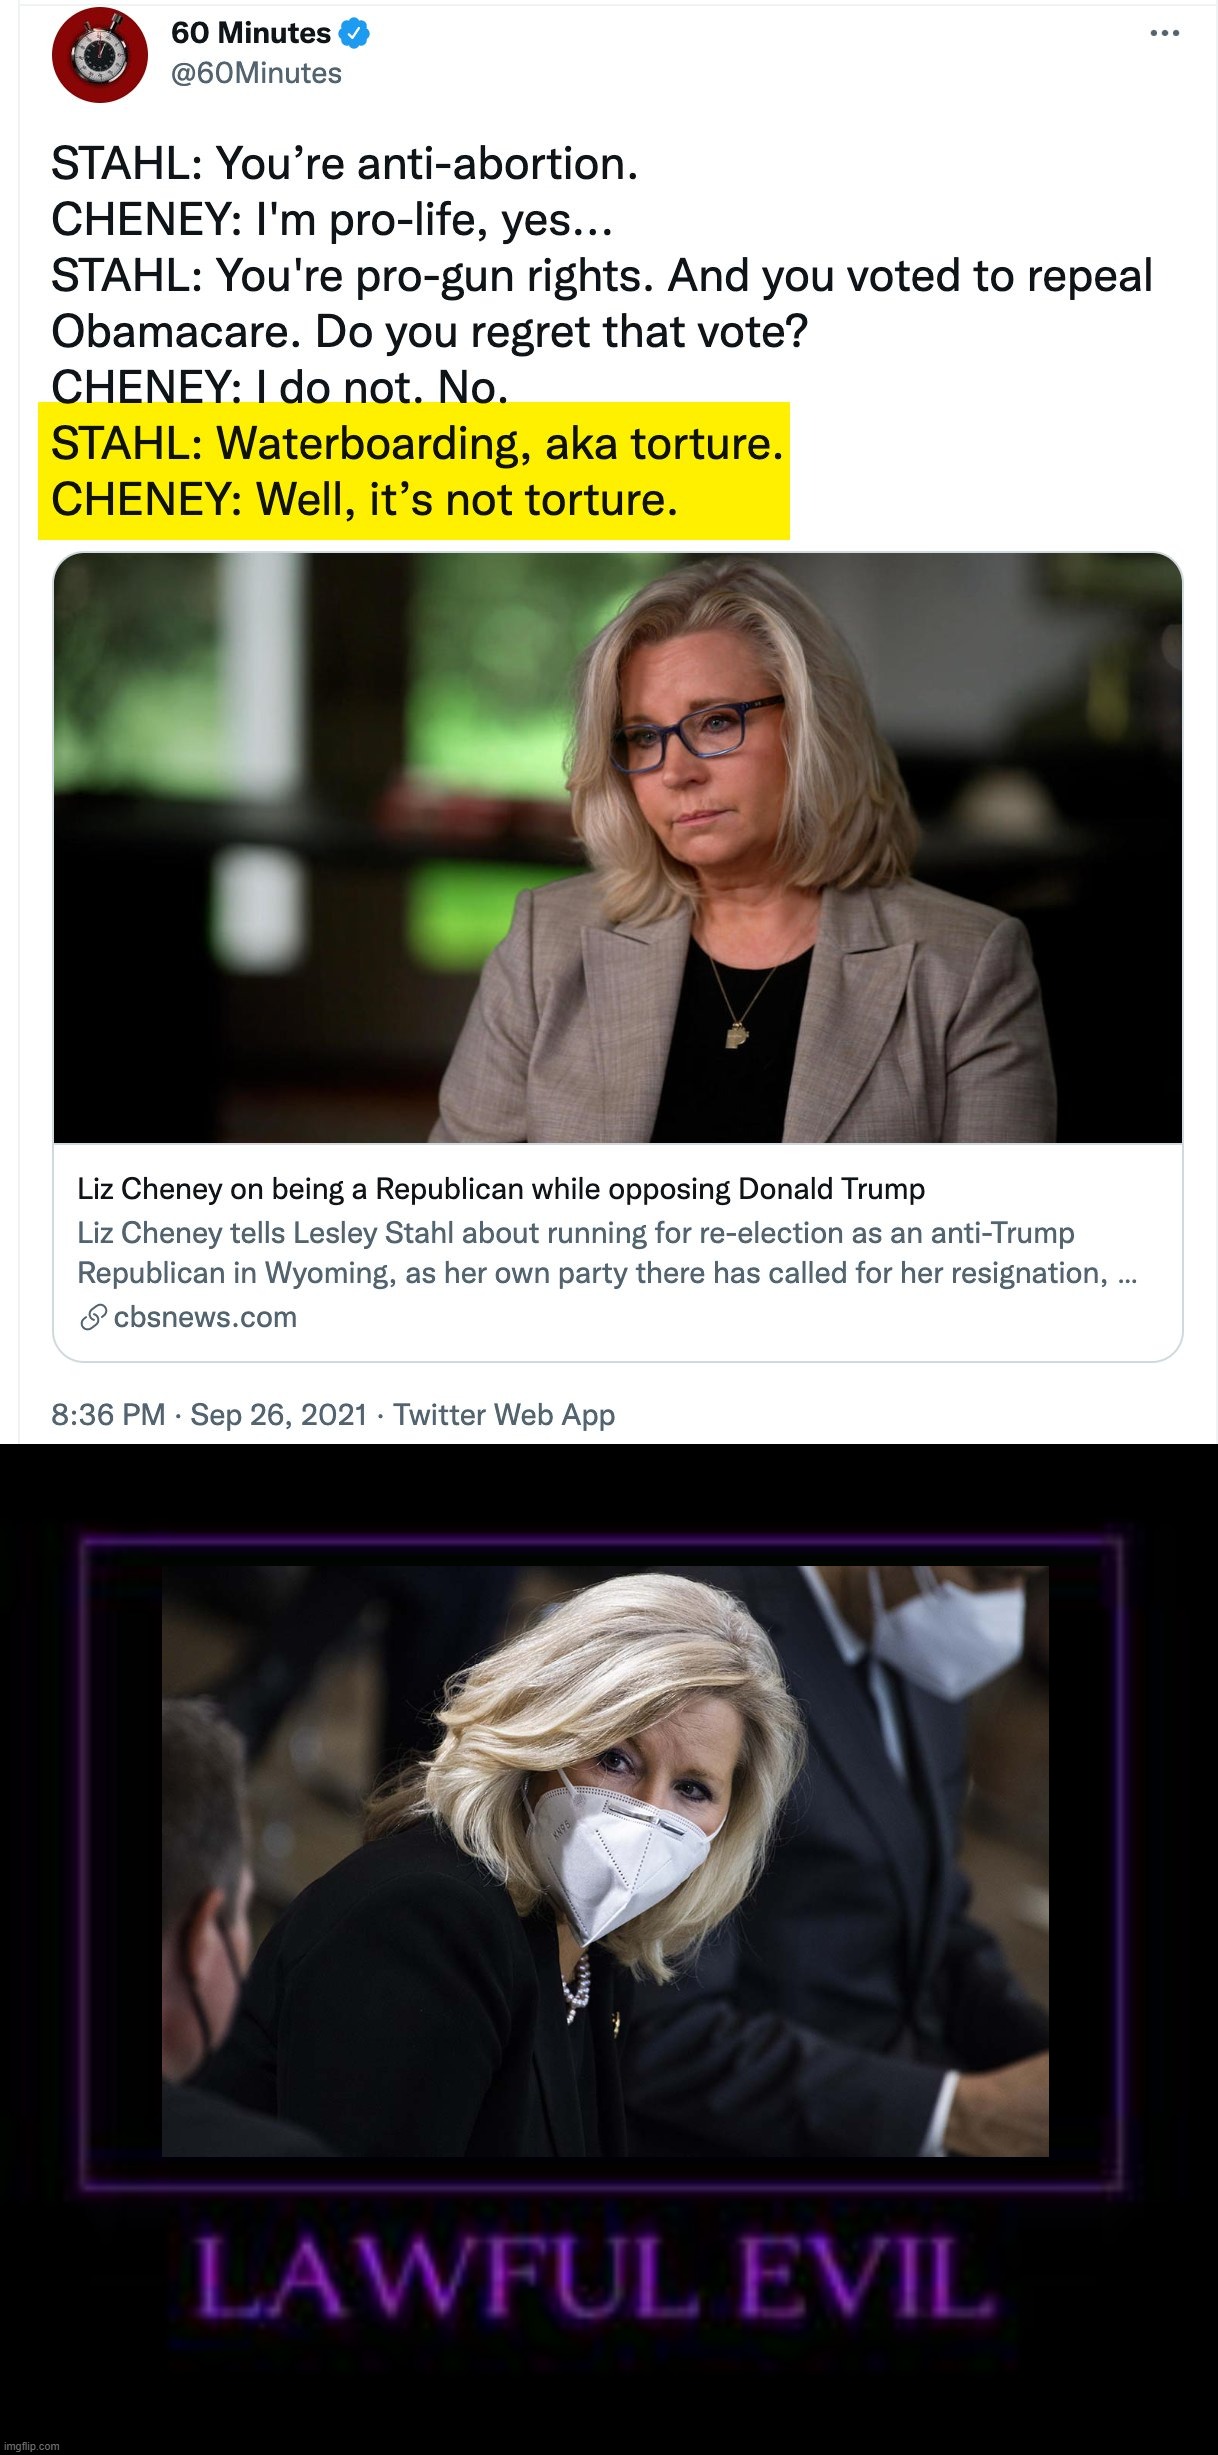 Lawful Evil Liz | image tagged in liz cheney 60 minutes interview,alignment chart,liz cheney,torture,republicans,waterboarding | made w/ Imgflip meme maker